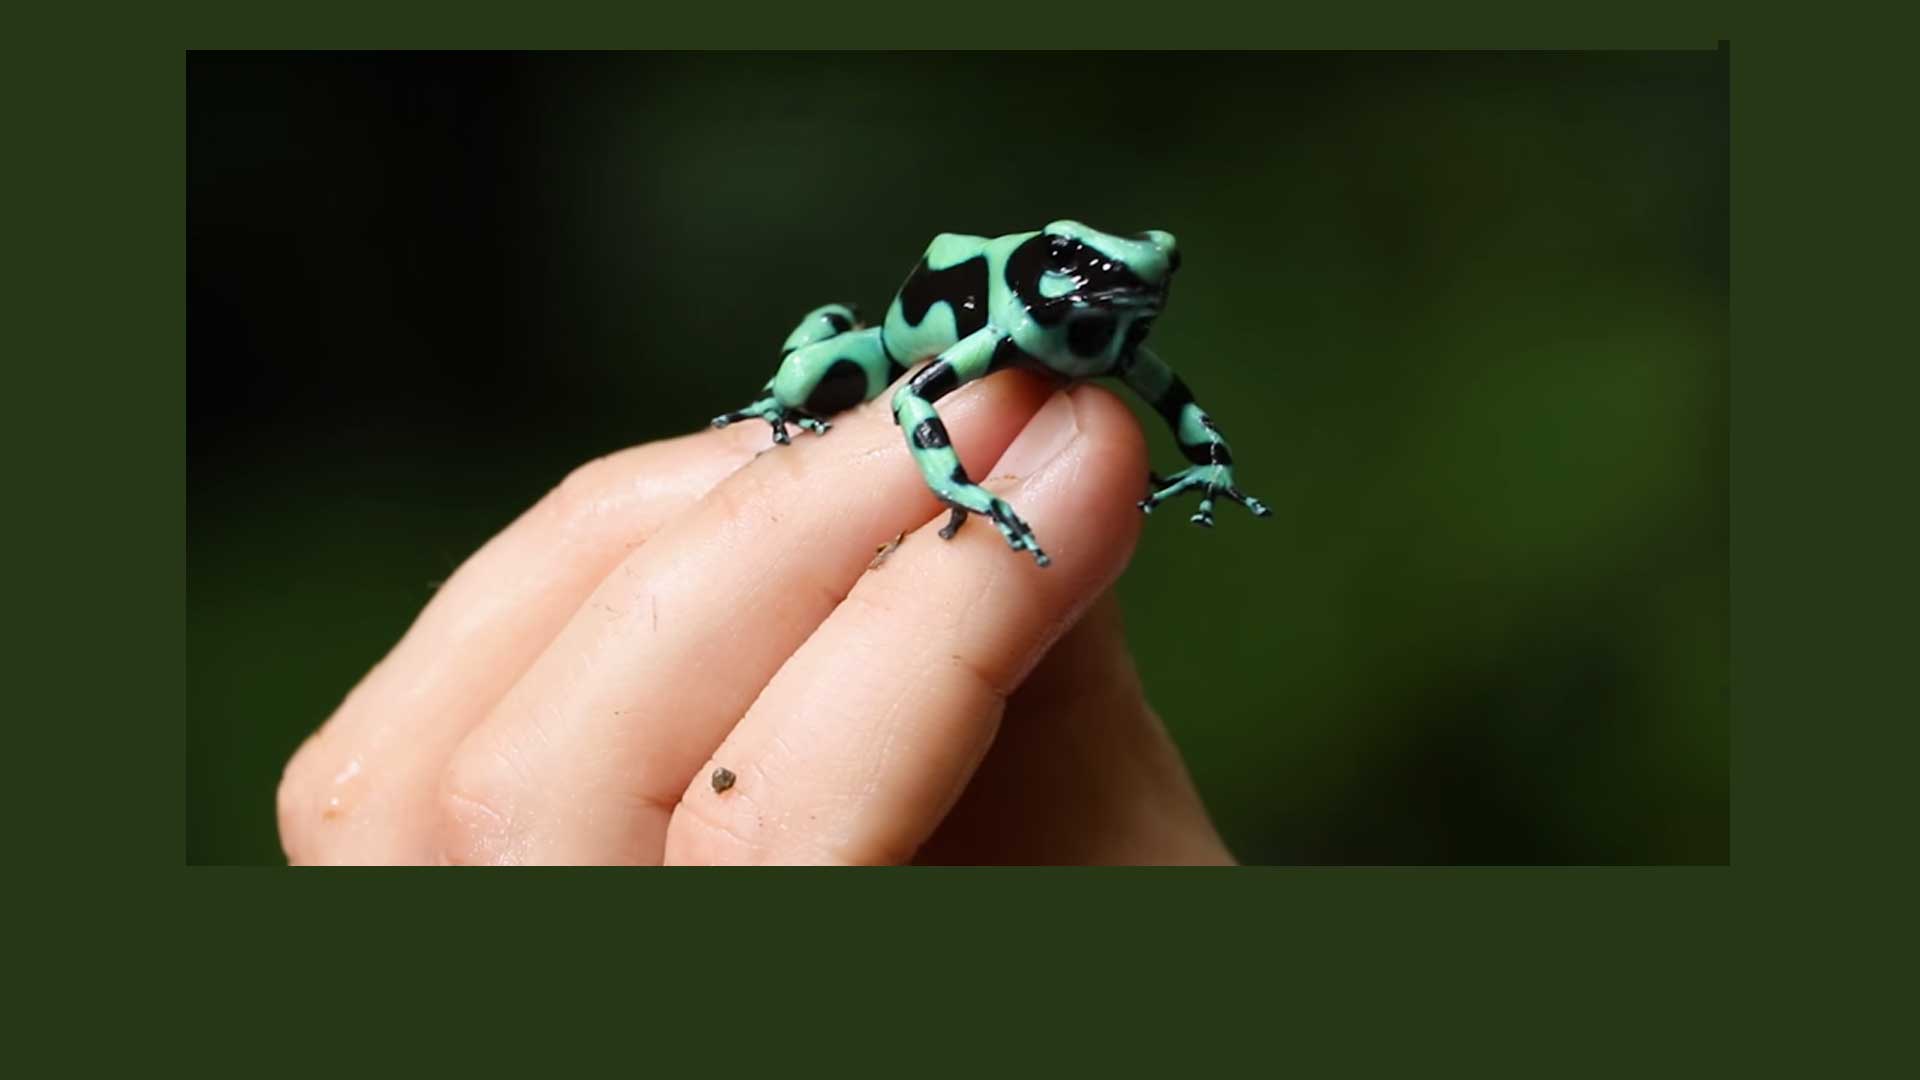 PoisonousFrogs